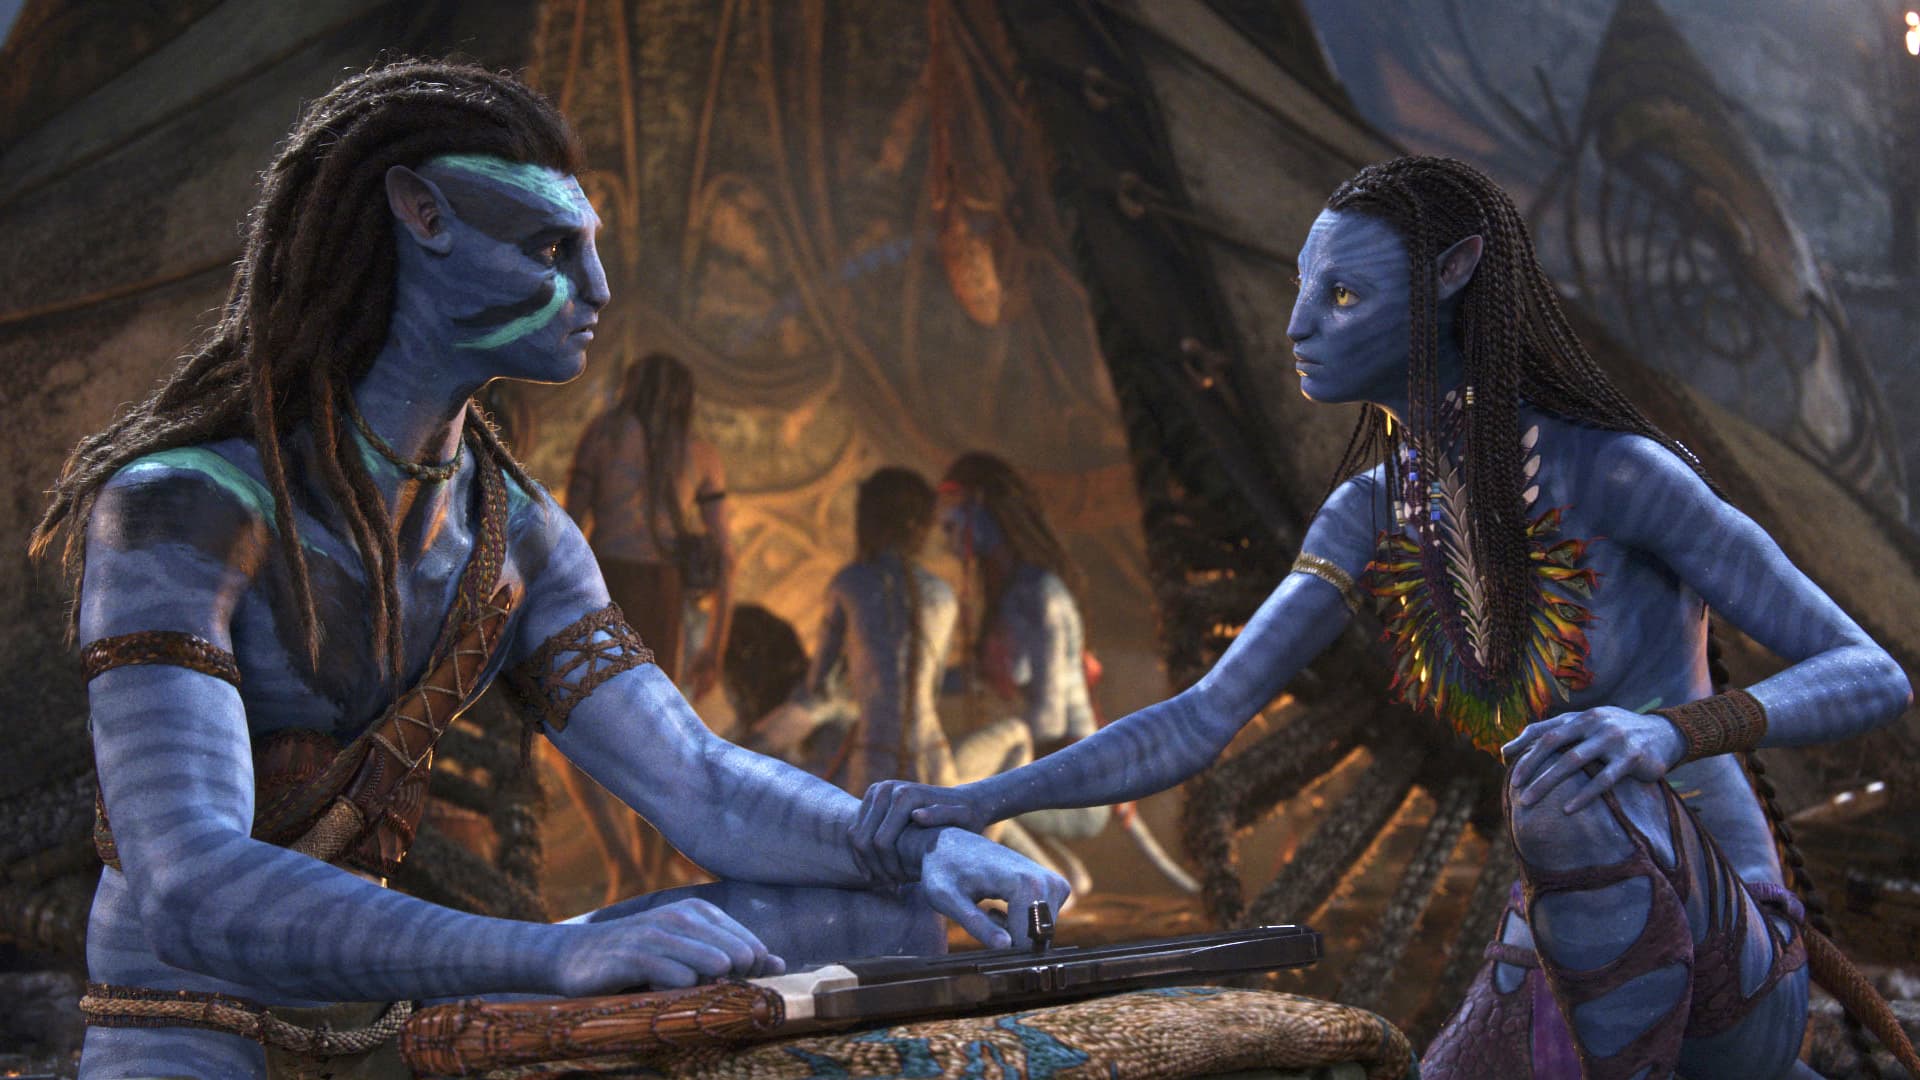 Why Indigenous groups are boycotting ‘Avatar: The Way of Water’